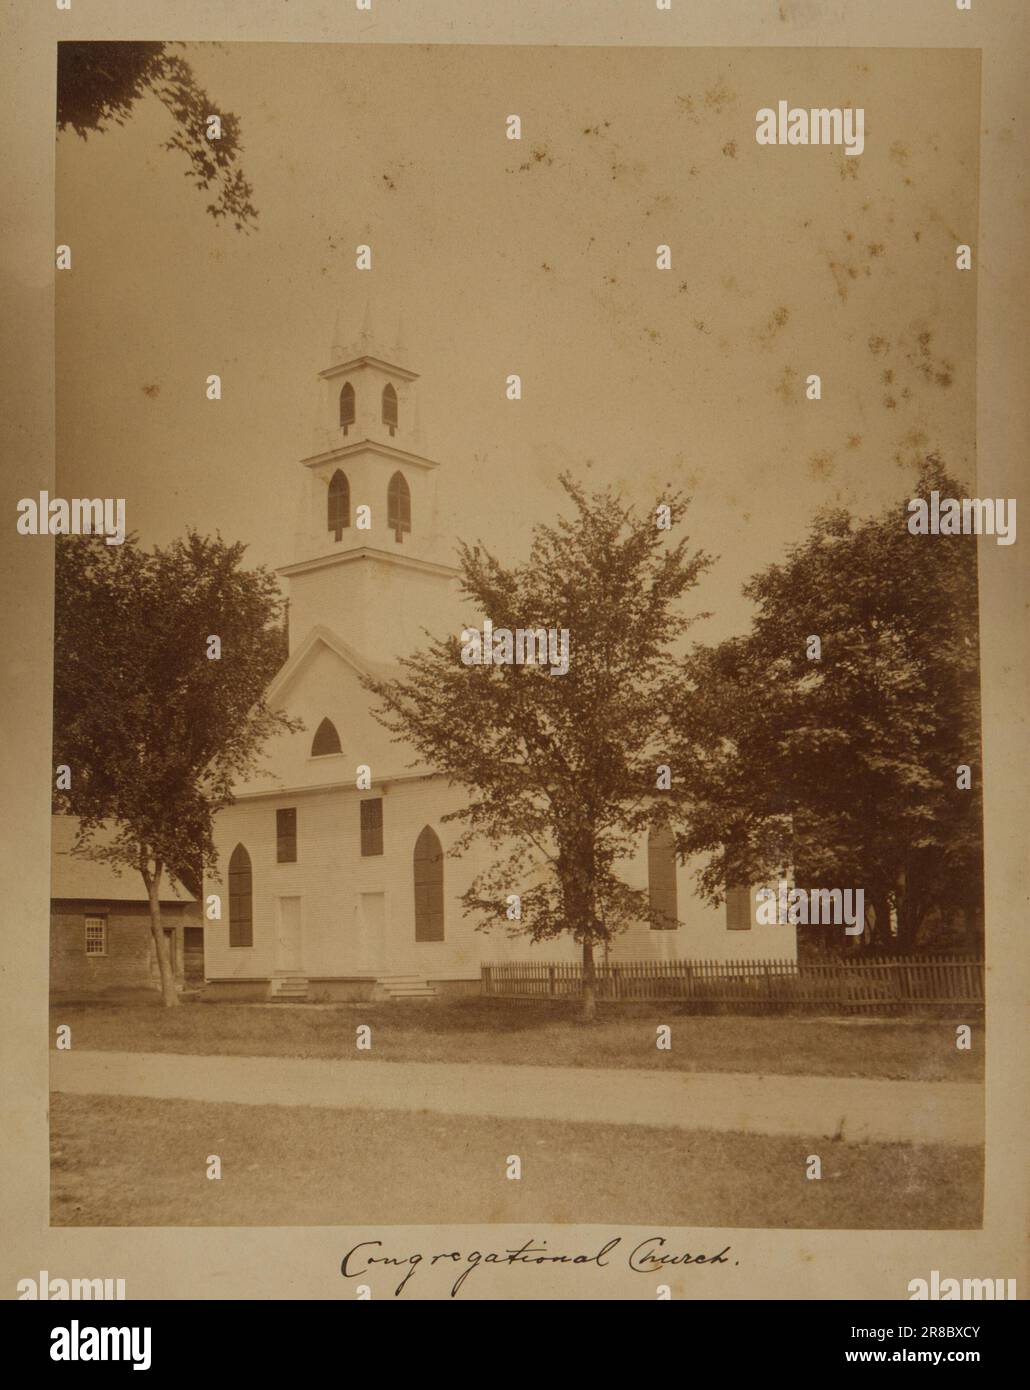 Congregational Church, from the album Views of Charlestown, New Hampshire 1888 by Gotthelf Pach, active 1880s Stock Photo